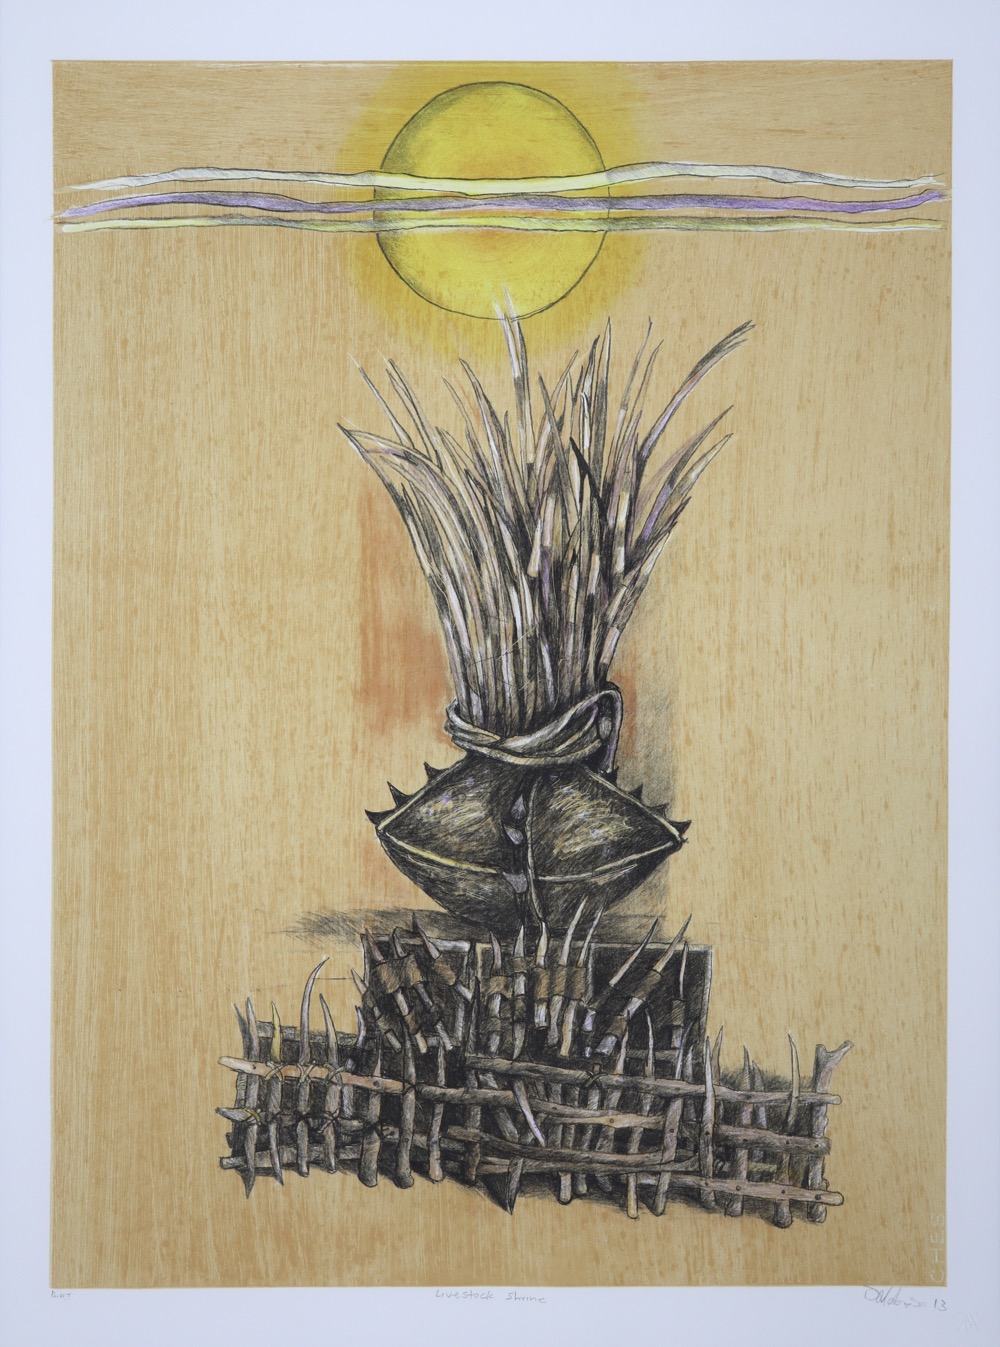 A barrier of spiky wooden posts with decorated clay vessel in middle of the frame with sun and clouds at the top.